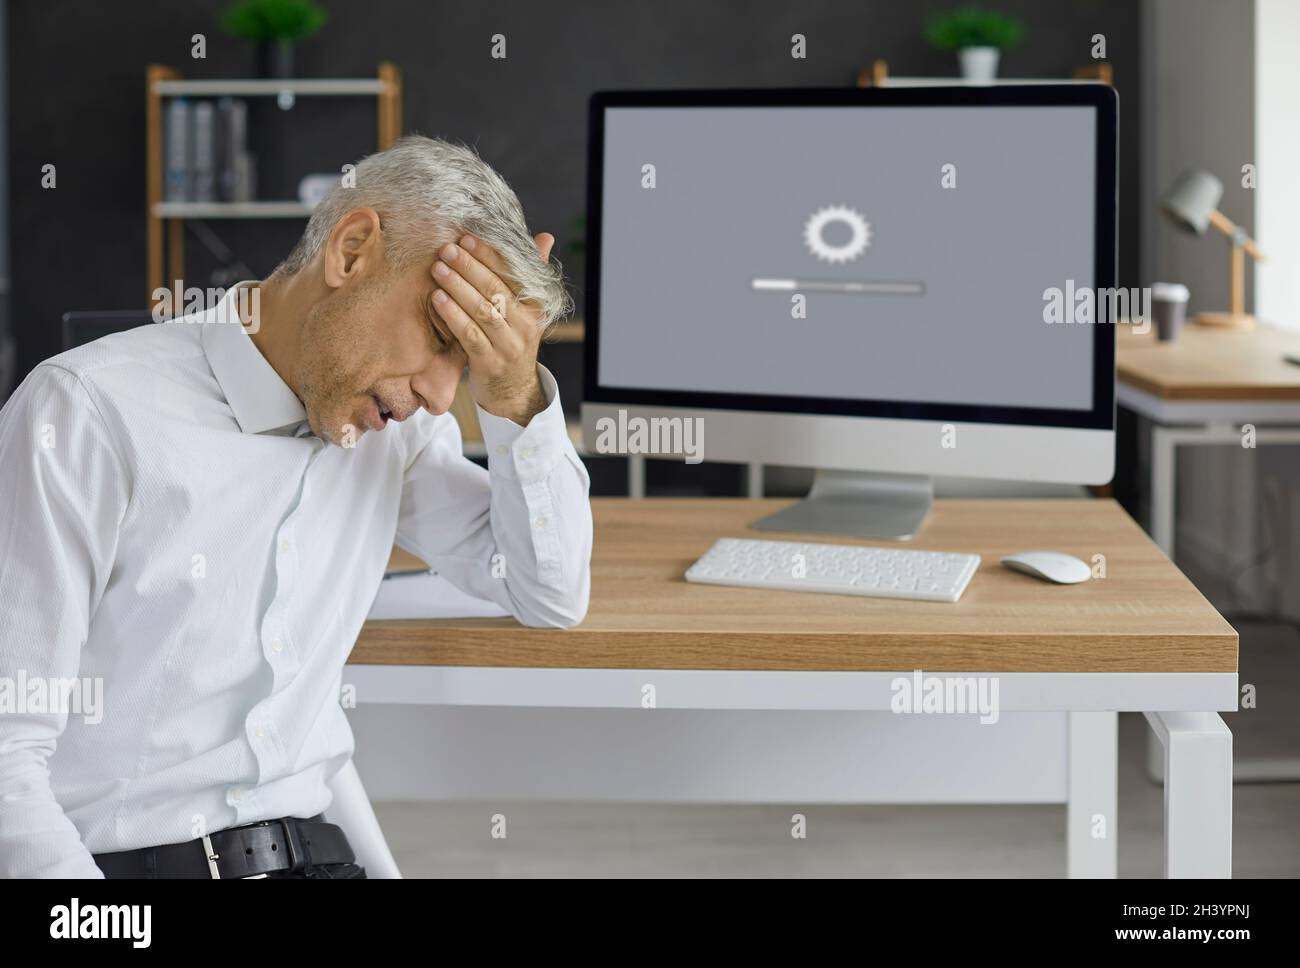 Office worker sitting in front of desktop computer and waiting for system to load Stock Photo